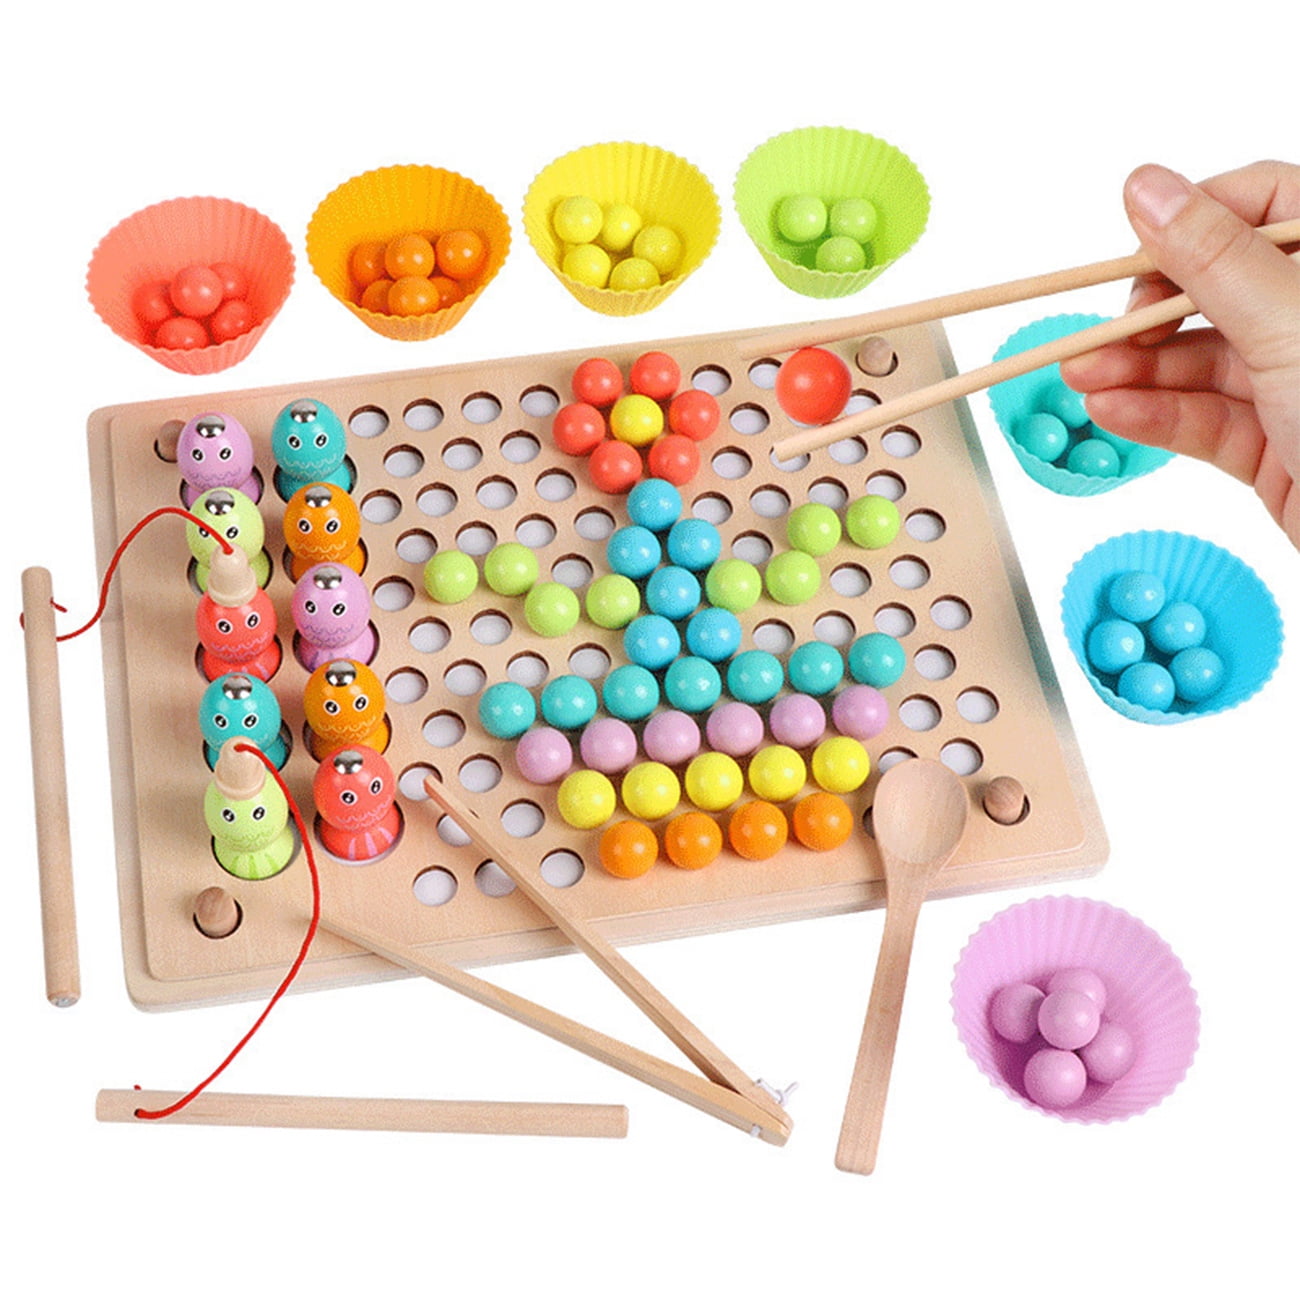 Details about   Montessori Educational Concentration Game Training Fine Motor Activities